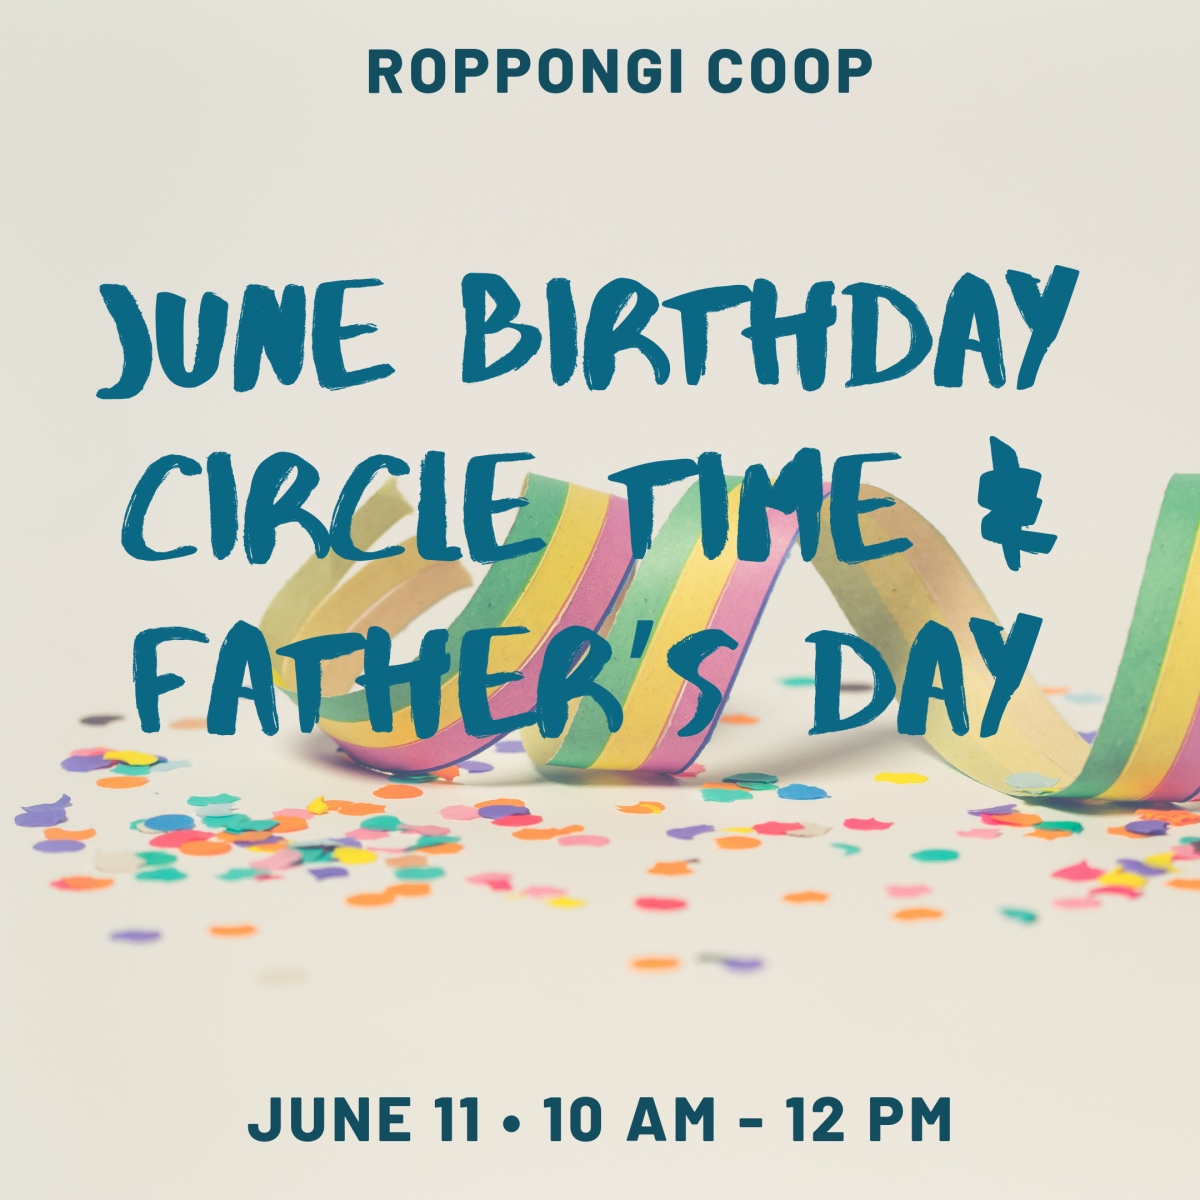 Playgroup Info June Birthday Circle Time Father S Day On 06 11 19 Roppongi Cooperative Playgroup